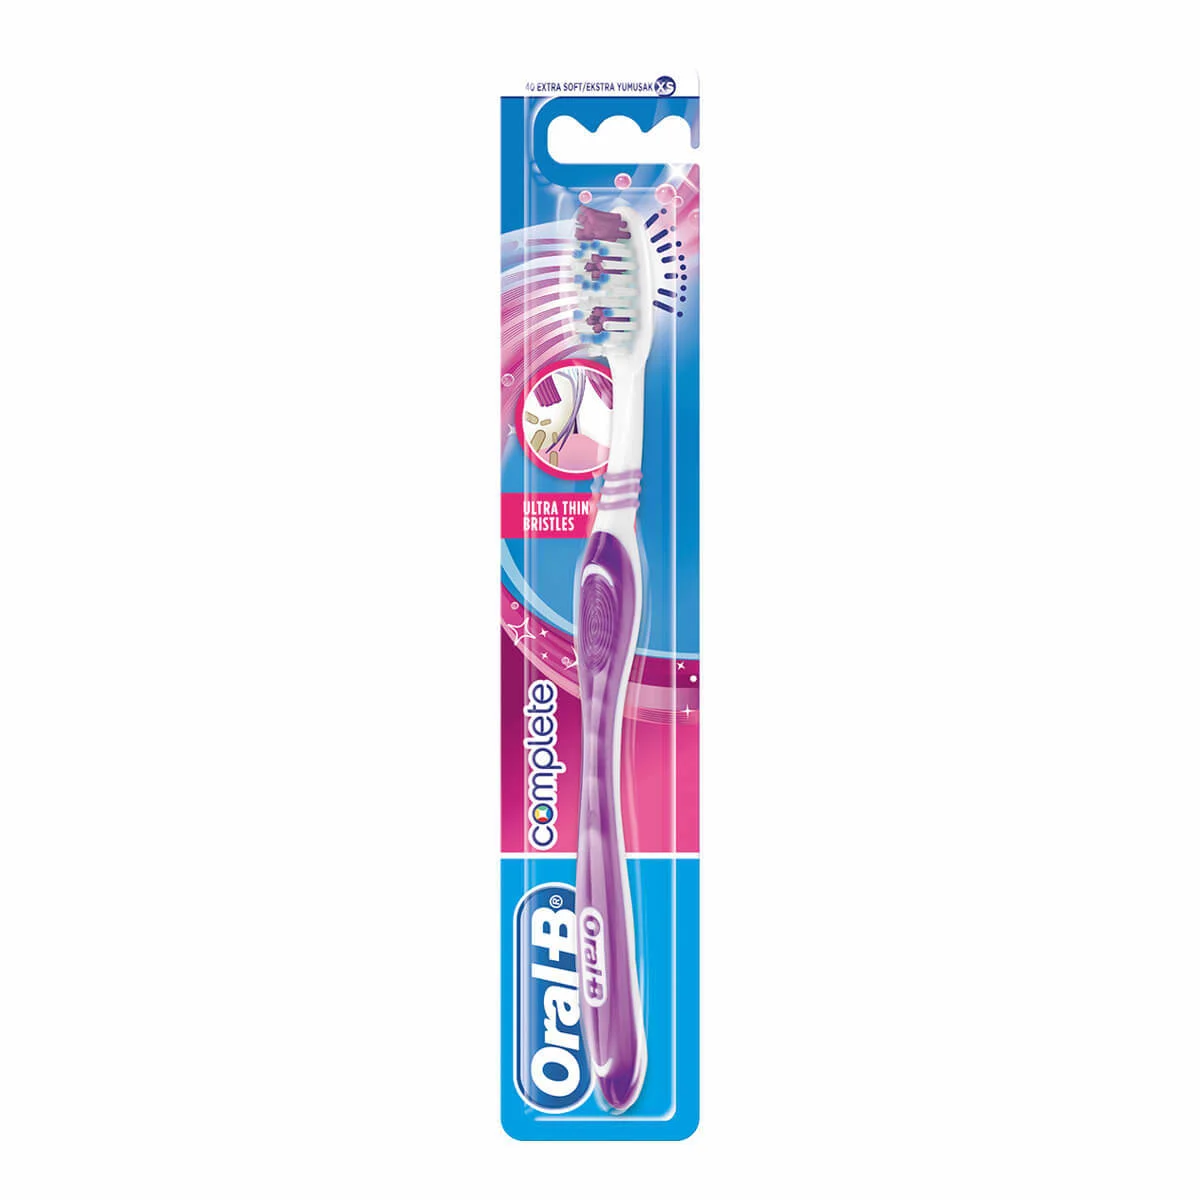 Oral-B Complete Ultra Thin Bristles Manual Toothbrush undefined